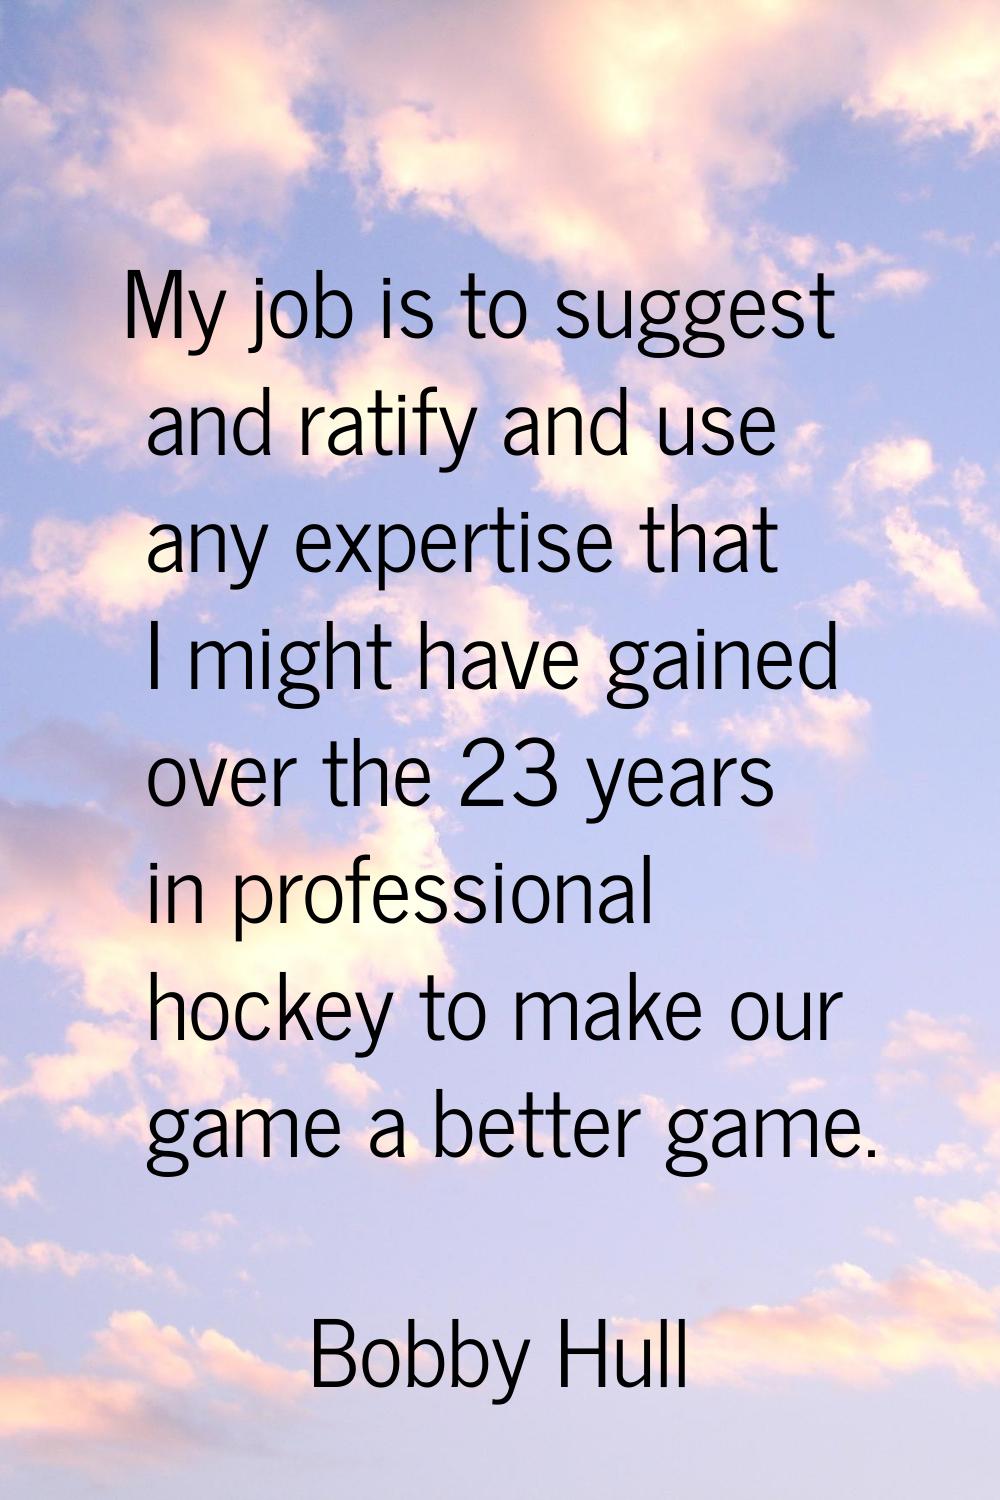 My job is to suggest and ratify and use any expertise that I might have gained over the 23 years in